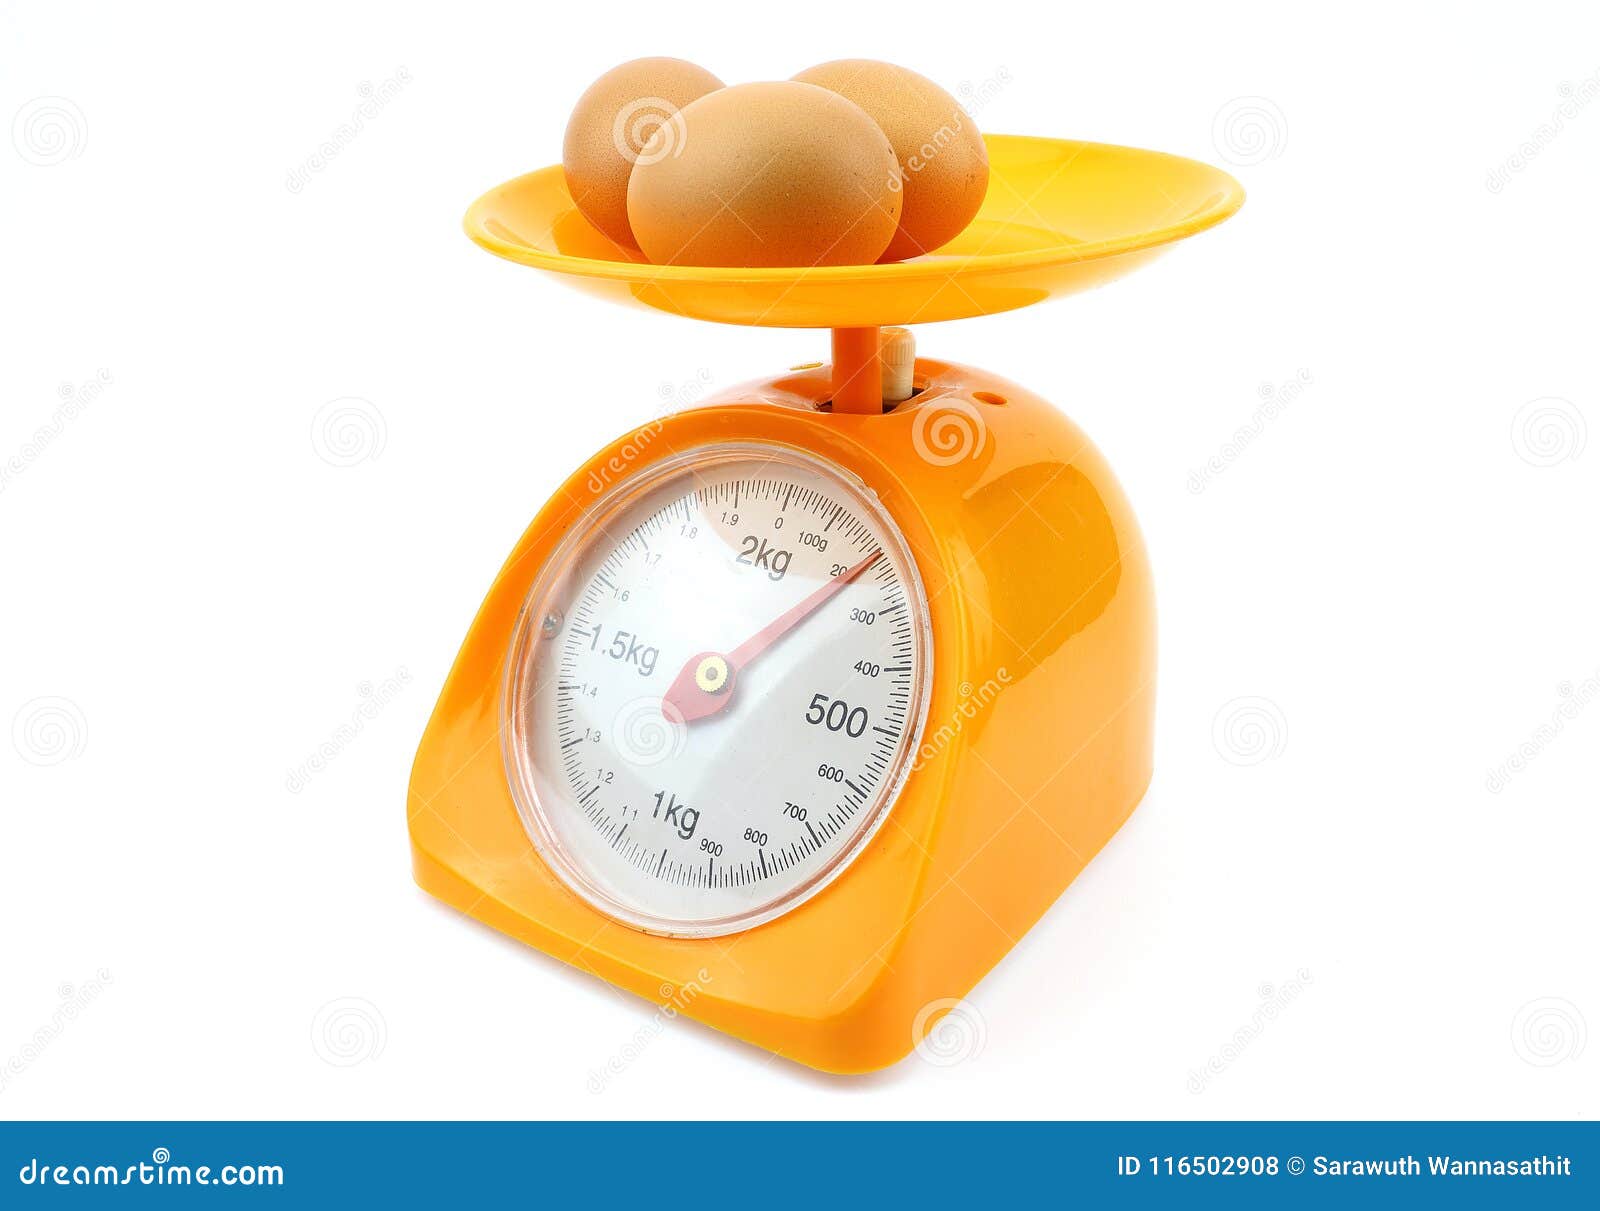 https://thumbs.dreamstime.com/z/egg-weight-scale-egg-weight-scale-isolated-white-background-116502908.jpg